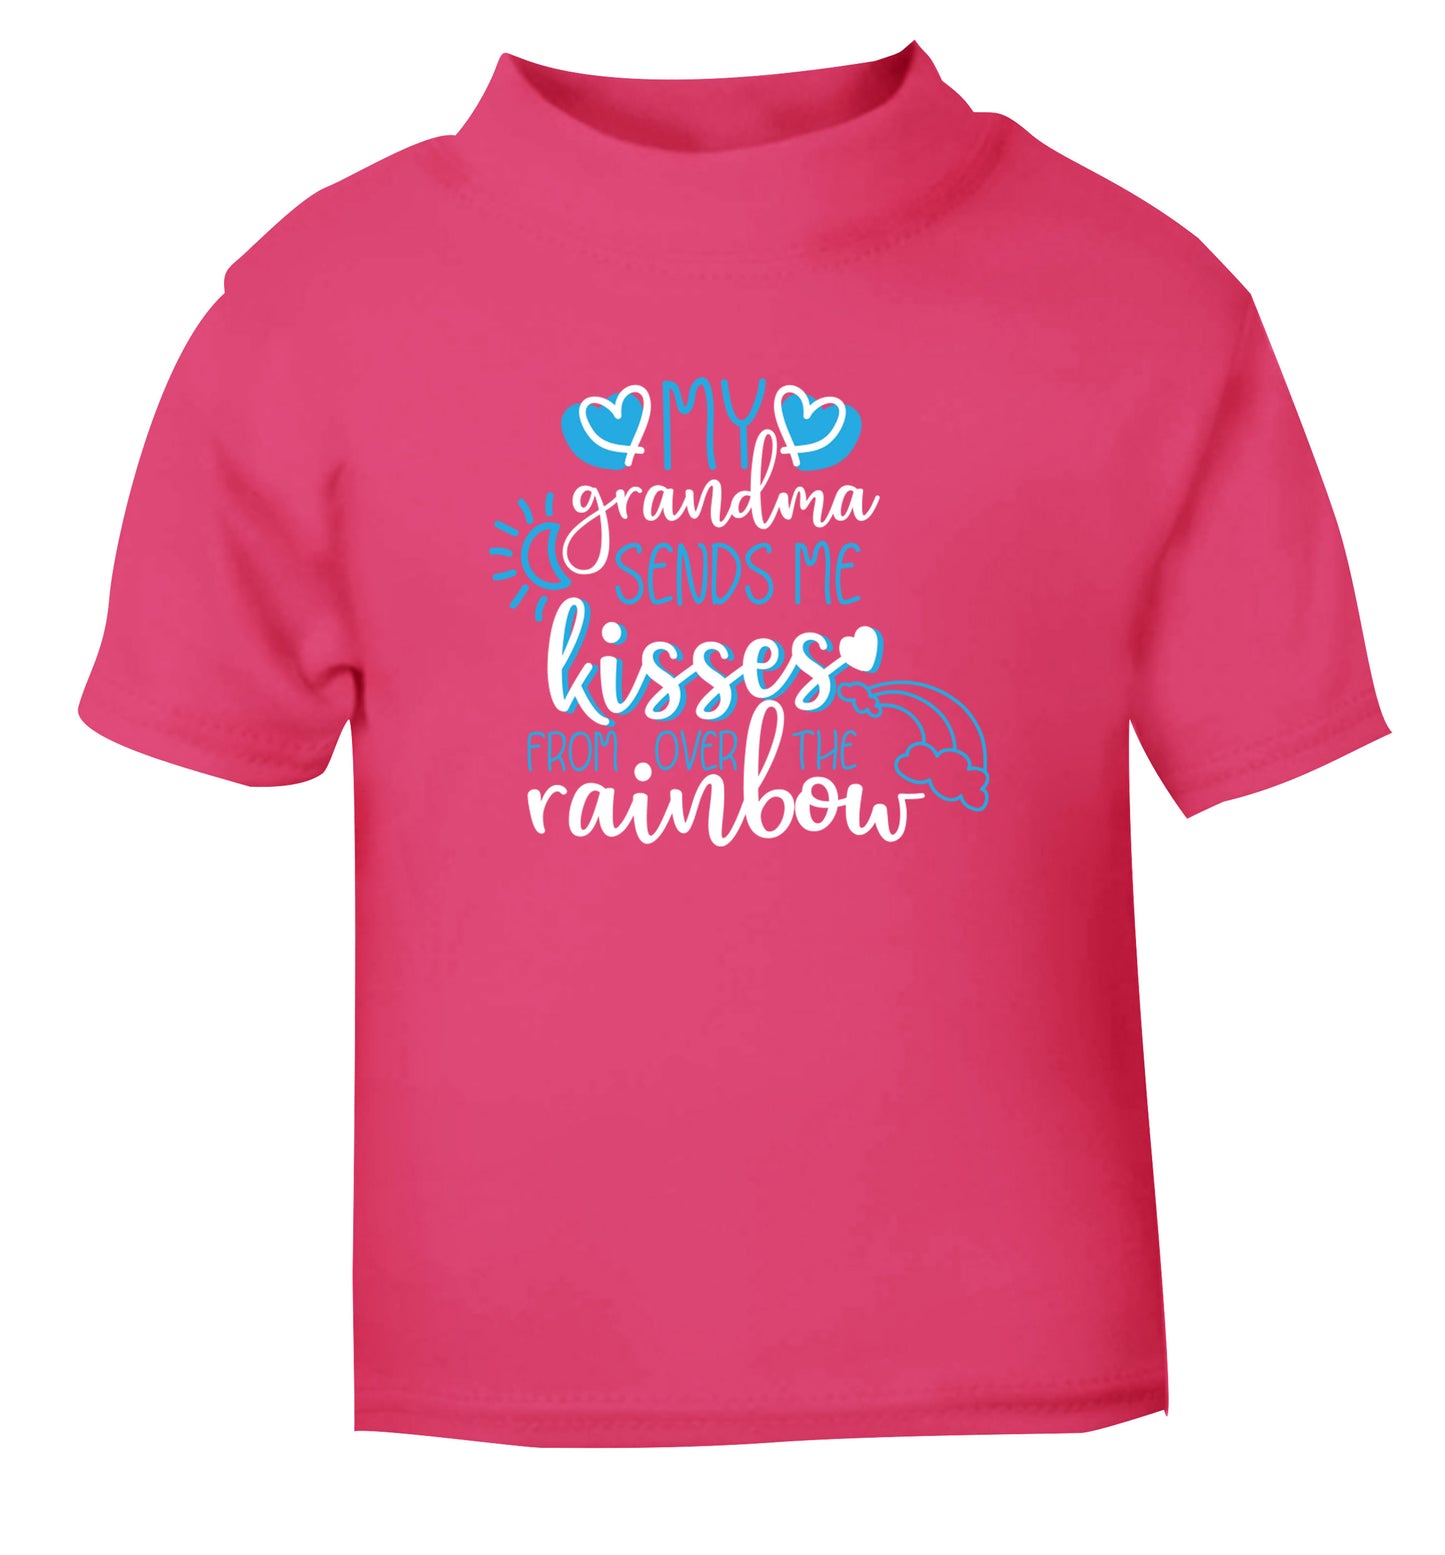 My grandma sends me kisses from over the rainbow pink Baby Toddler Tshirt 2 Years